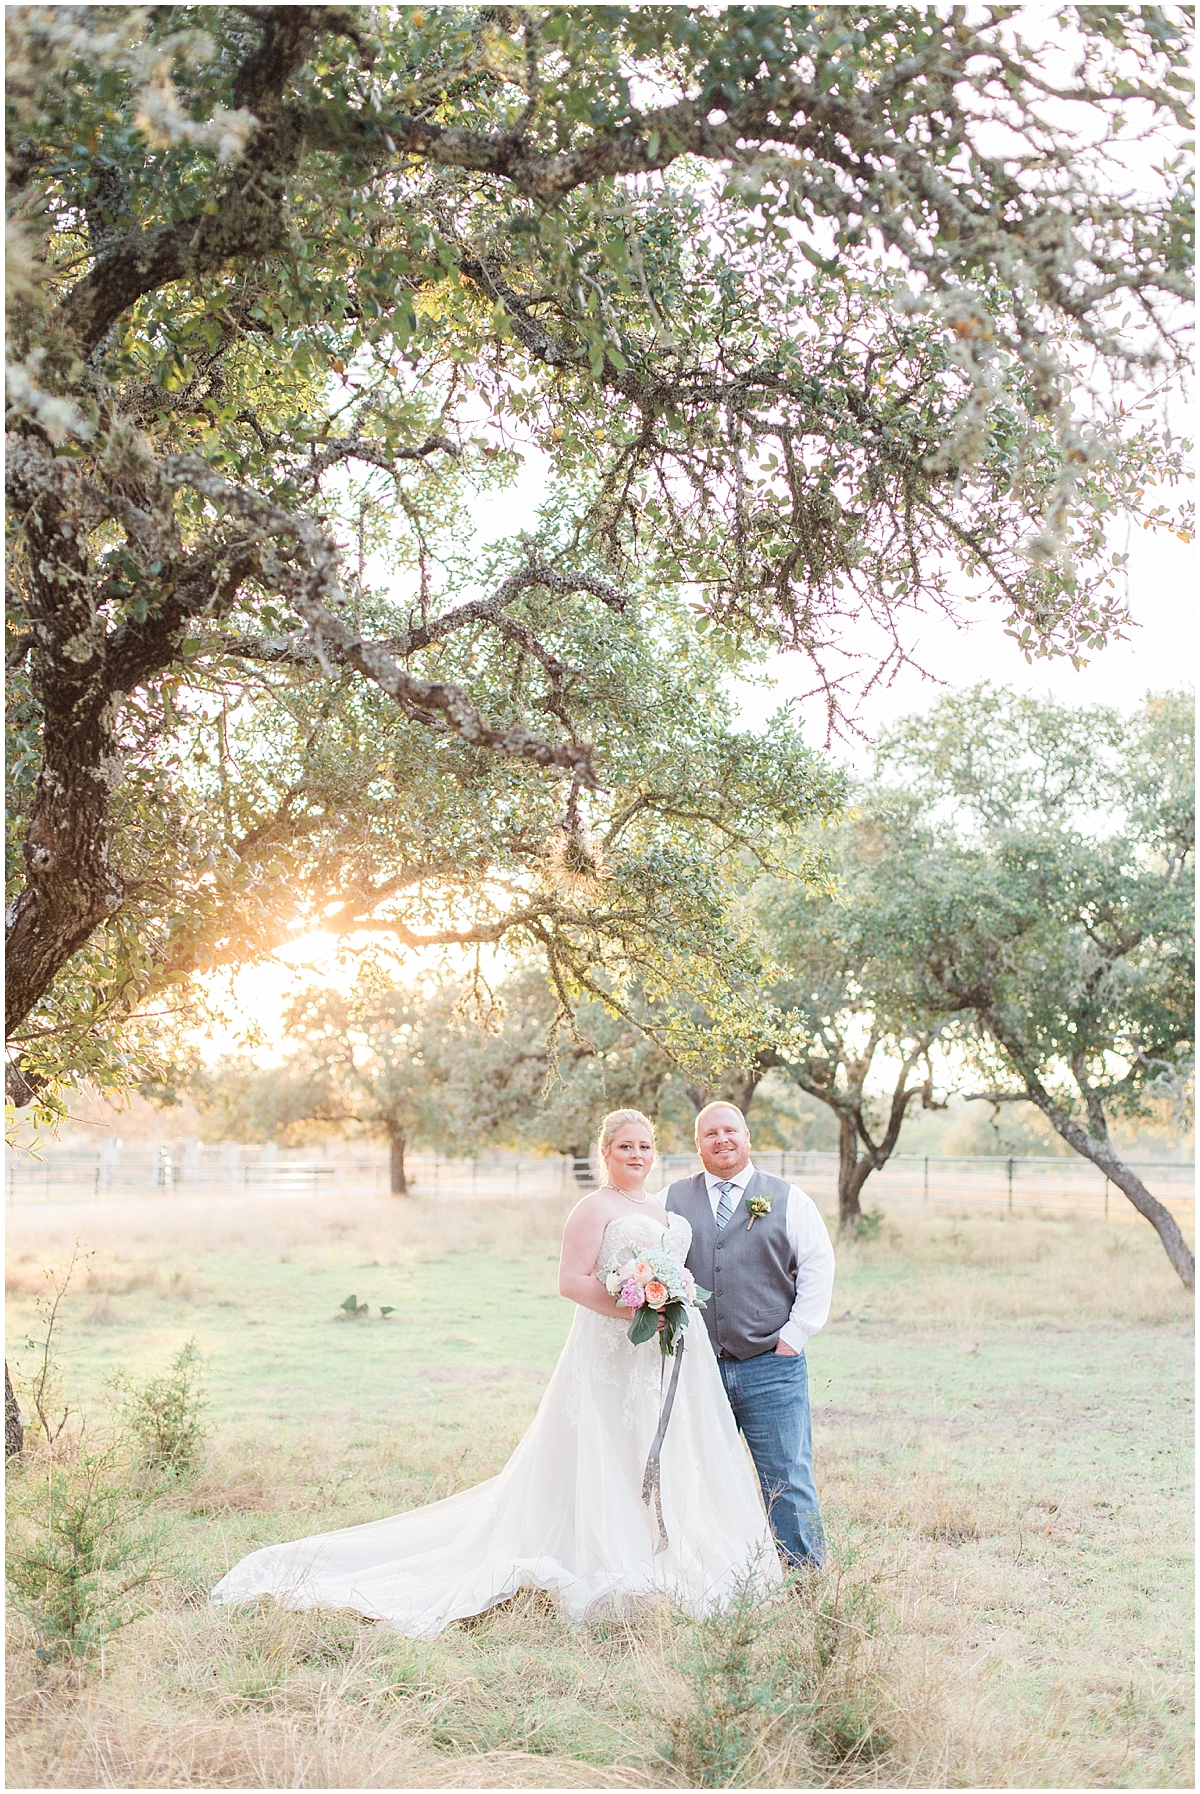 a-slate-blue-and-grey-winter-wedding-at-cw-hill-country-ranch-in-boerne-texas-by-allison-jeffers-wedding-photography_0086